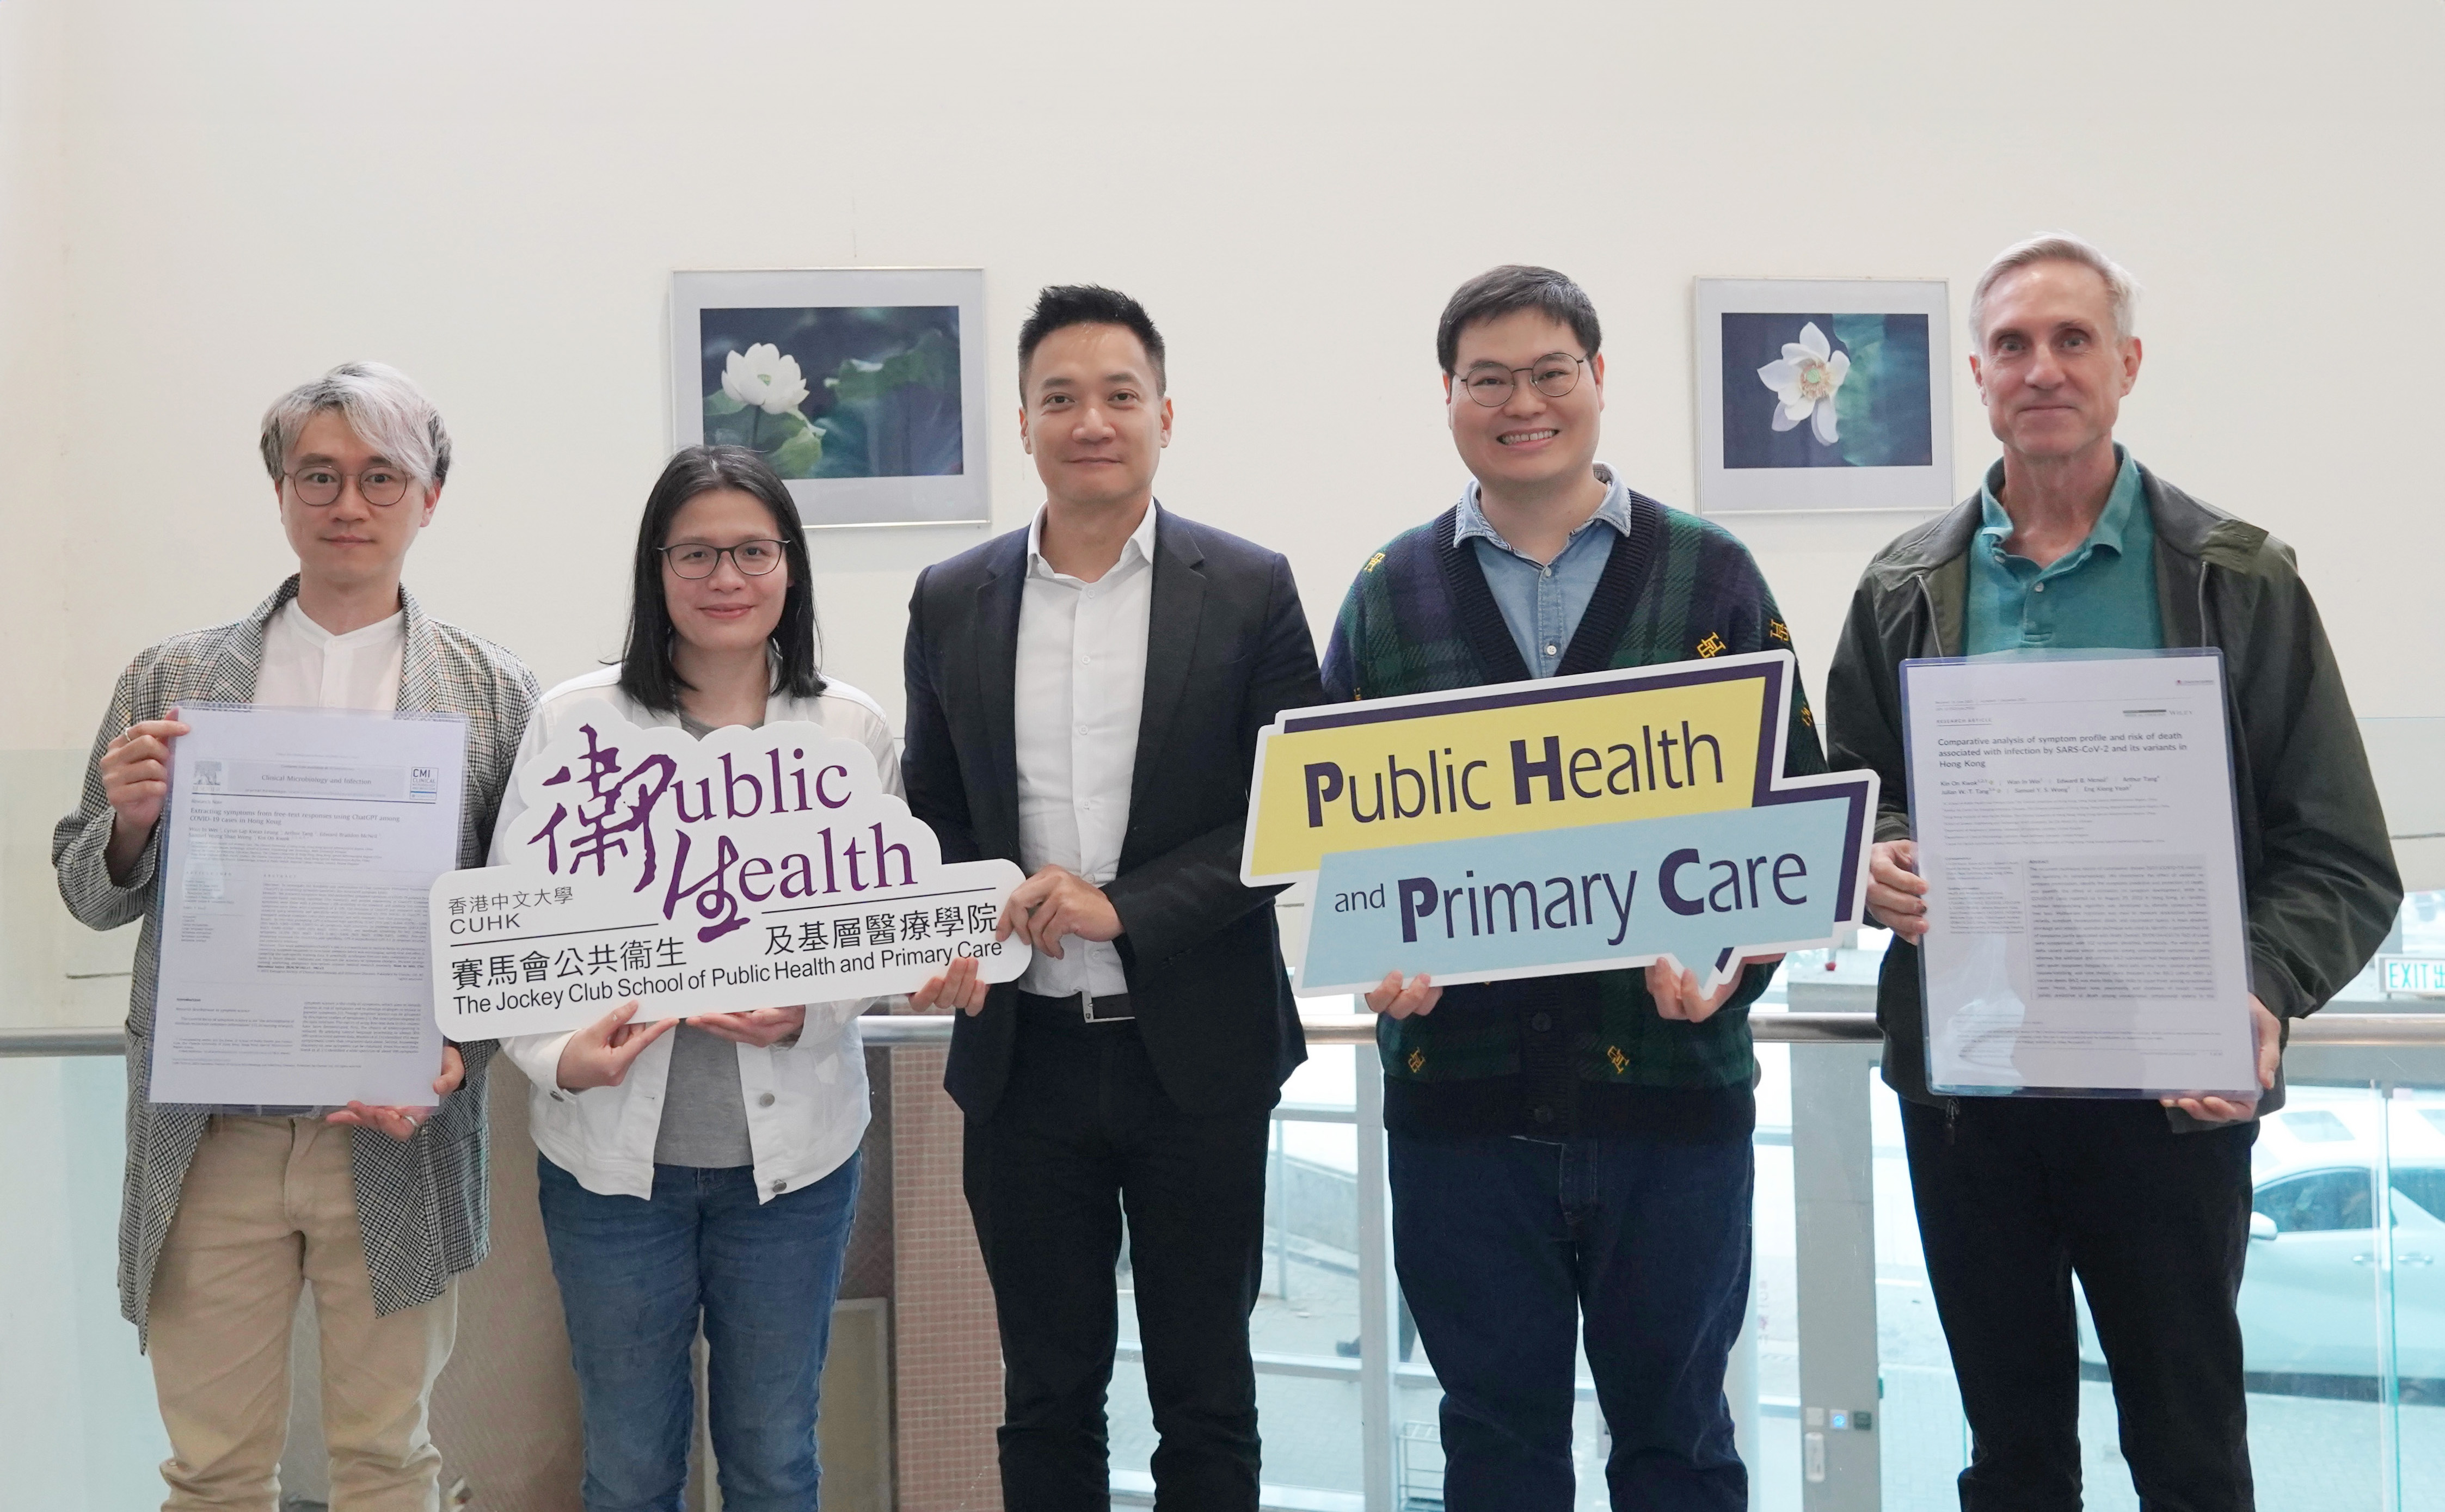 Featured in the photo are members of the research team. (From left) Dr Cyrus Leung, Postdoctoral Fellow; Miss Vivian Wei, Research Associate; Professor Samuel Wong, Director; Professor Kwok Kin-on, Associate Professor; and Mr Edward McNeil, Senior Research Assistant, from The Jockey Club School of Public Health and Primary Care at CU Medicine.